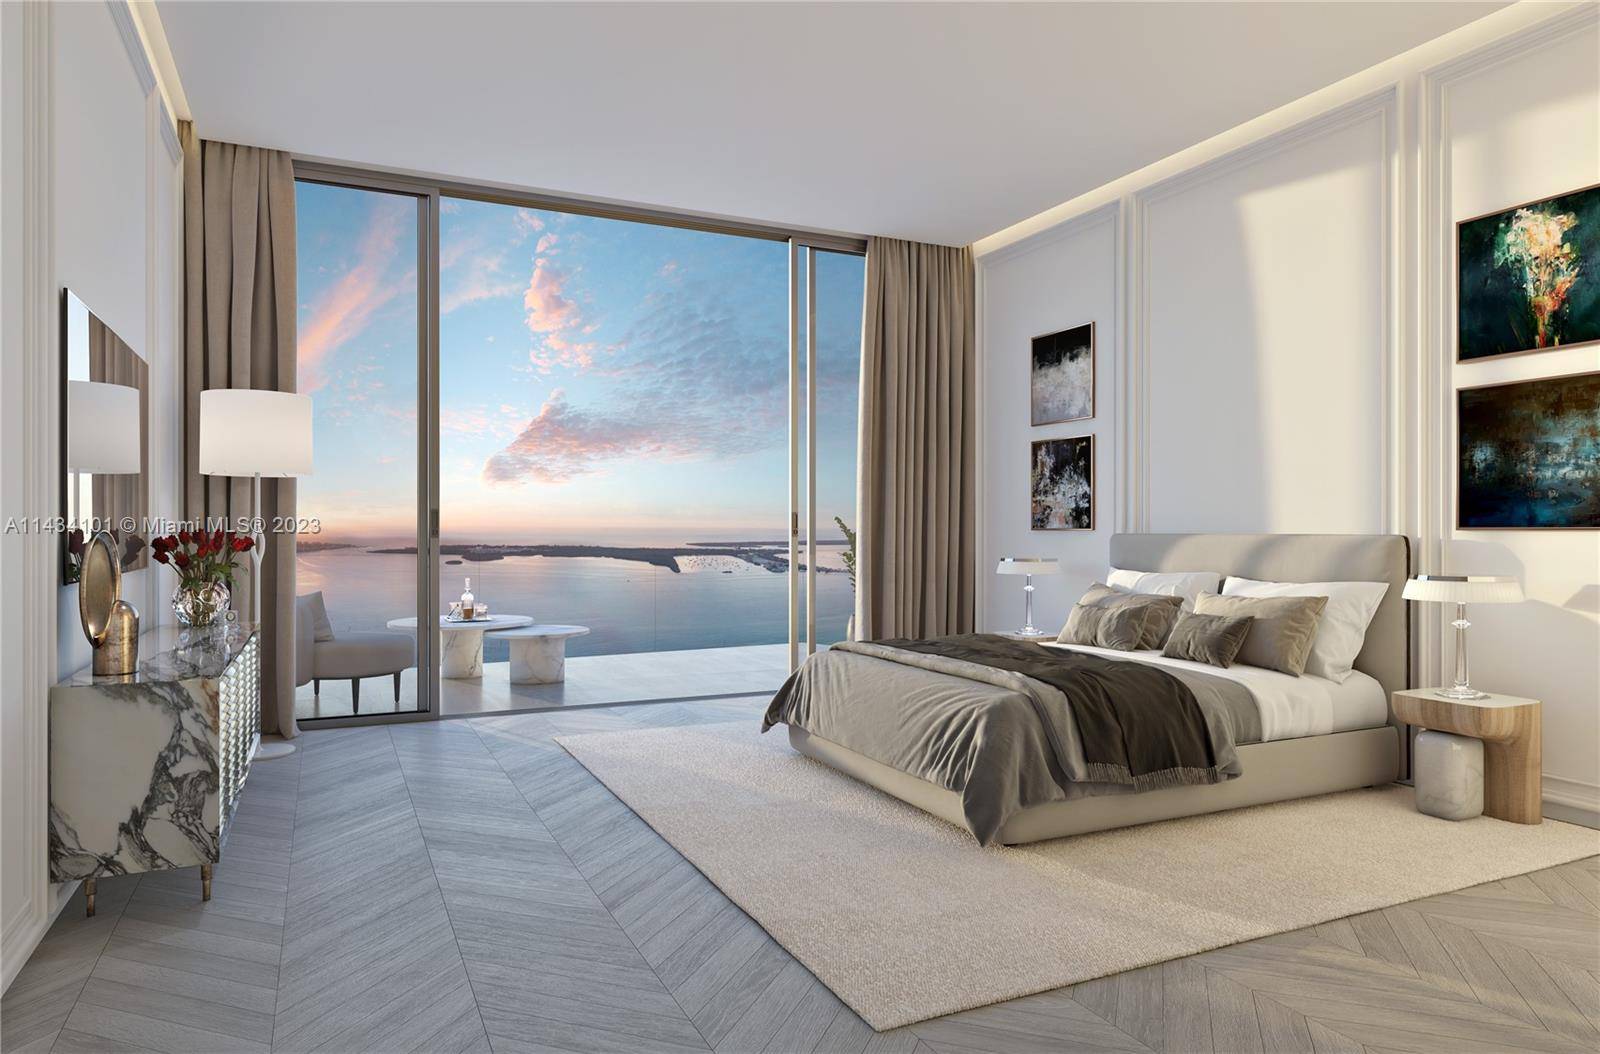 Experience unrivaled luxury living at Baccarat Residences Miami.